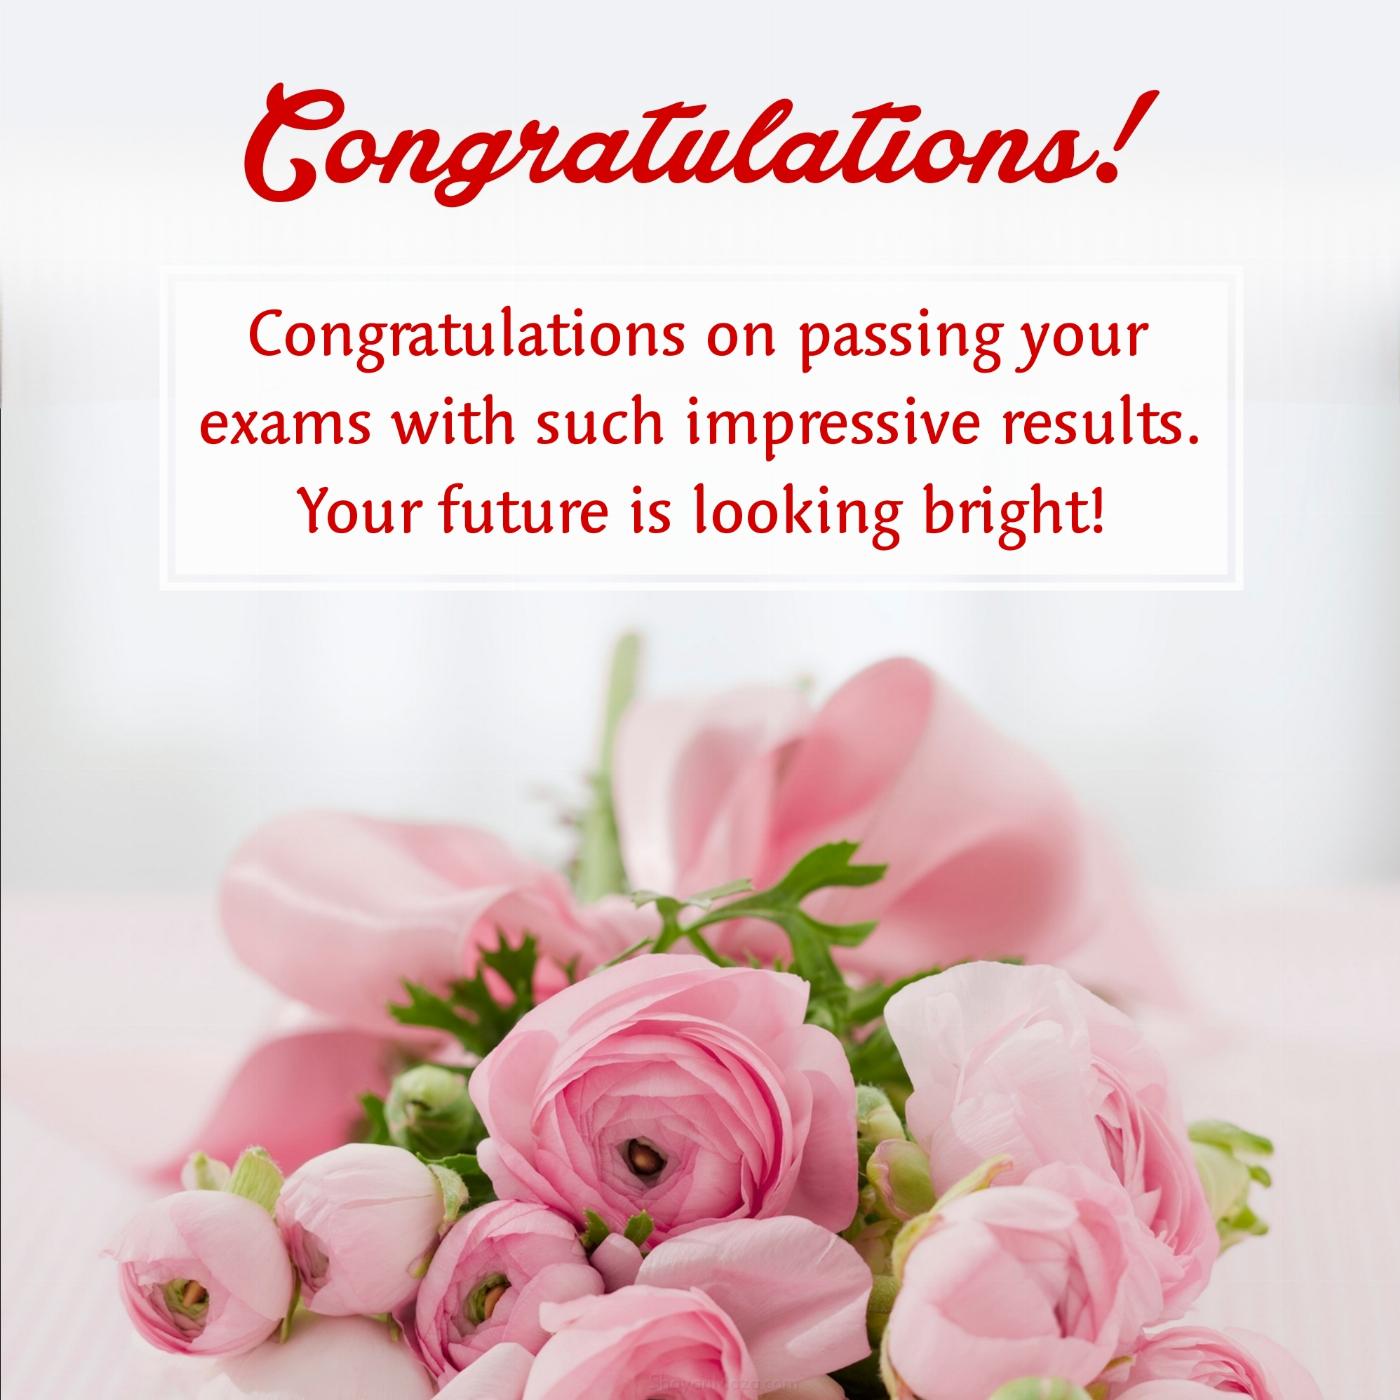 Congratulations on passing your exams with such impressive results